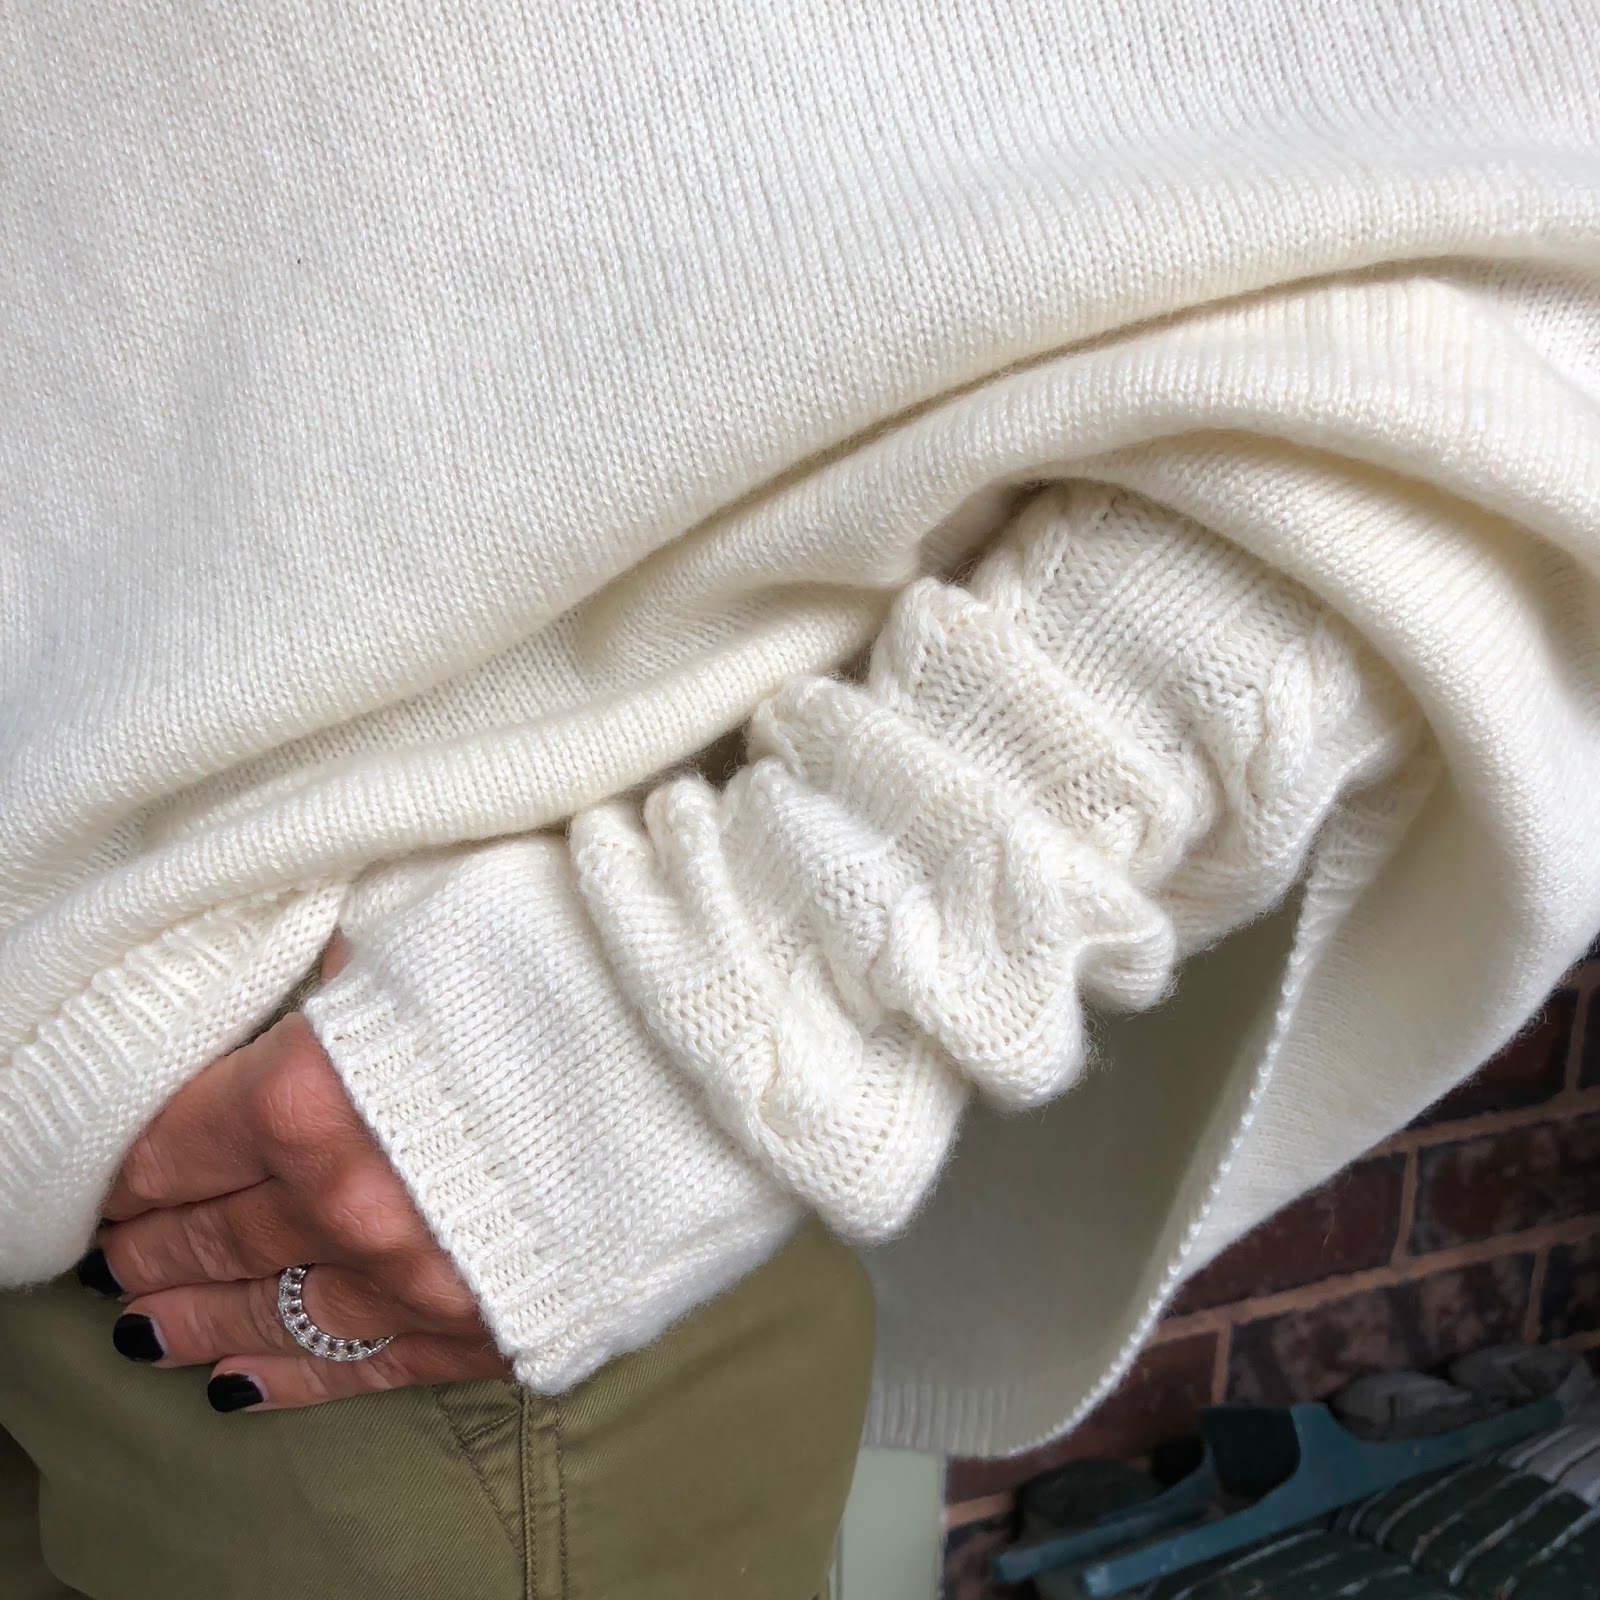 my midlife fashion, italy in cashmere cream white pure cashmere cable knit wrist warmer gloves, italy in cashmere cream white pure cashmere roll neck poncho cape